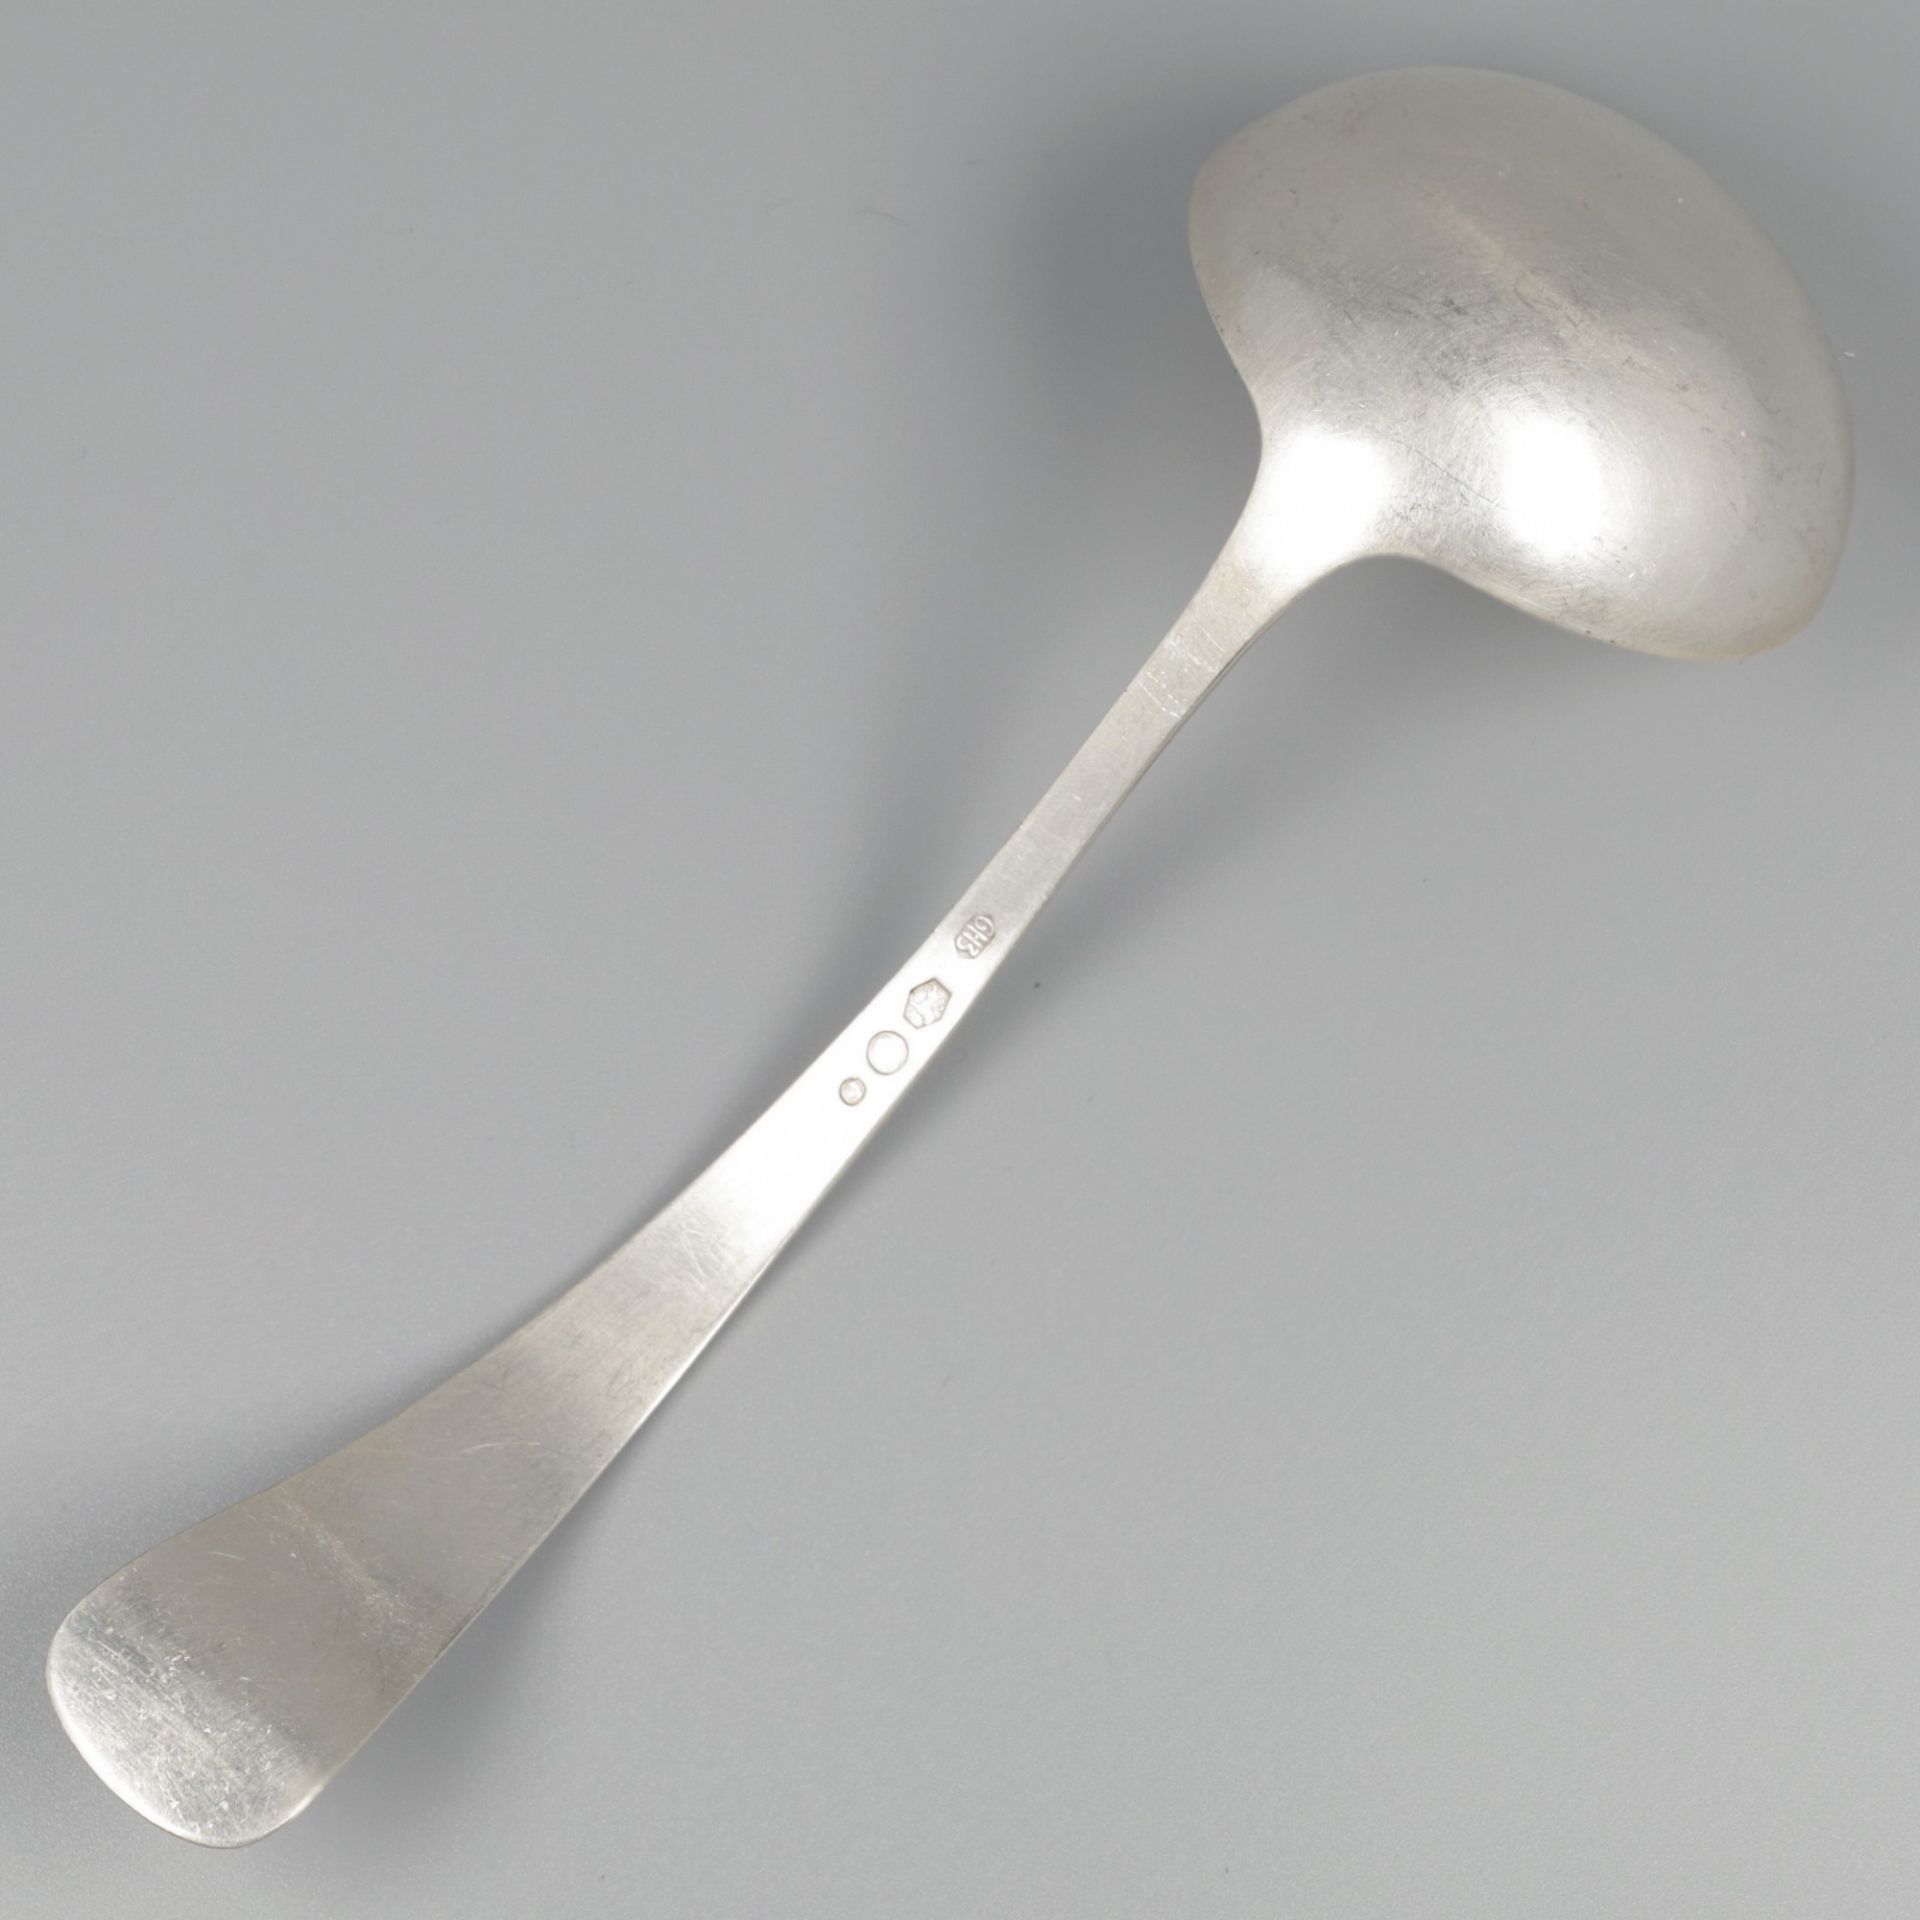 No reserve - Sauce serving spoon "Haags Lofje" silver. - Image 2 of 5